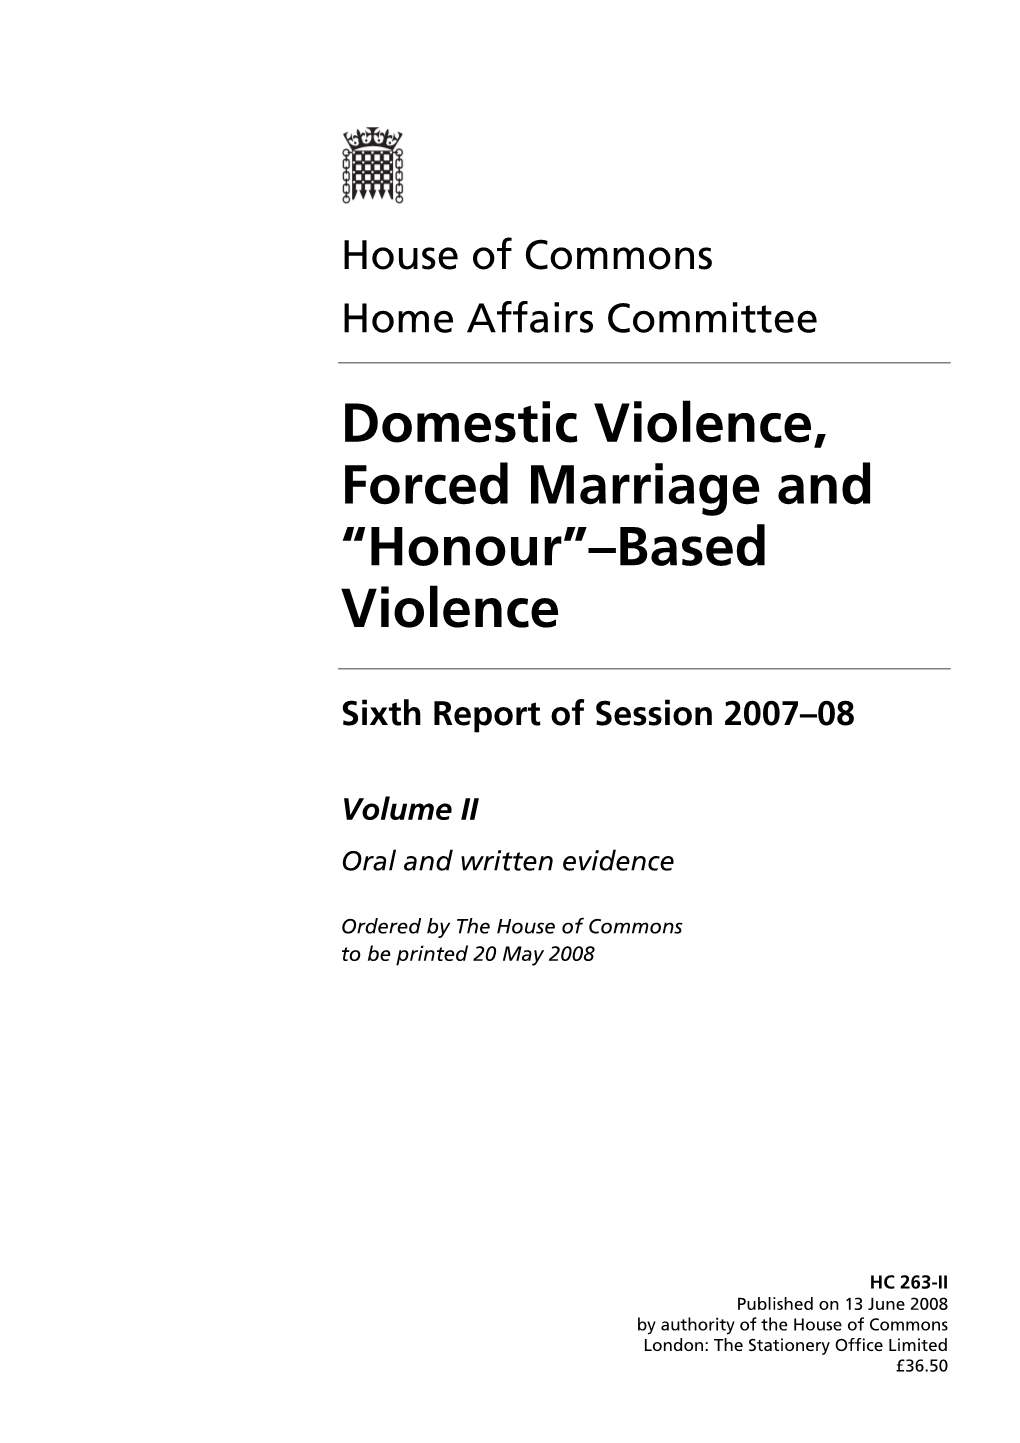 Domestic Violence, Forced Marriage and “Honour”–Based Violence